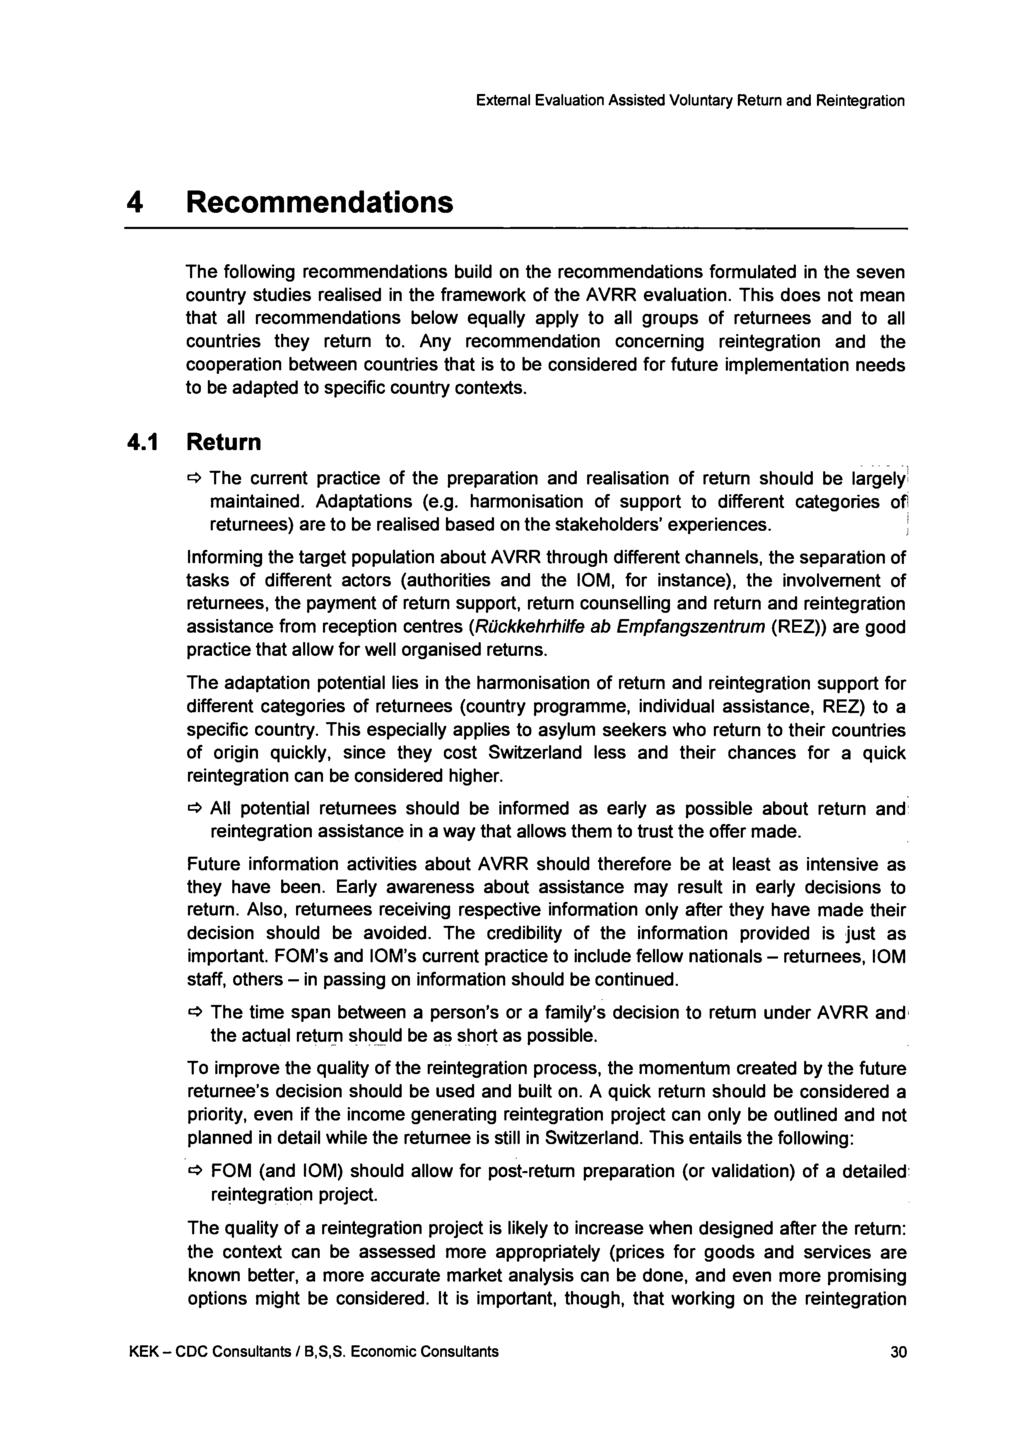 External Evaluation Assisted Voluntary Return and Reintegration 4 Recommendations The following recommendations build on the recommendations formulated in the seven country studies realised in the